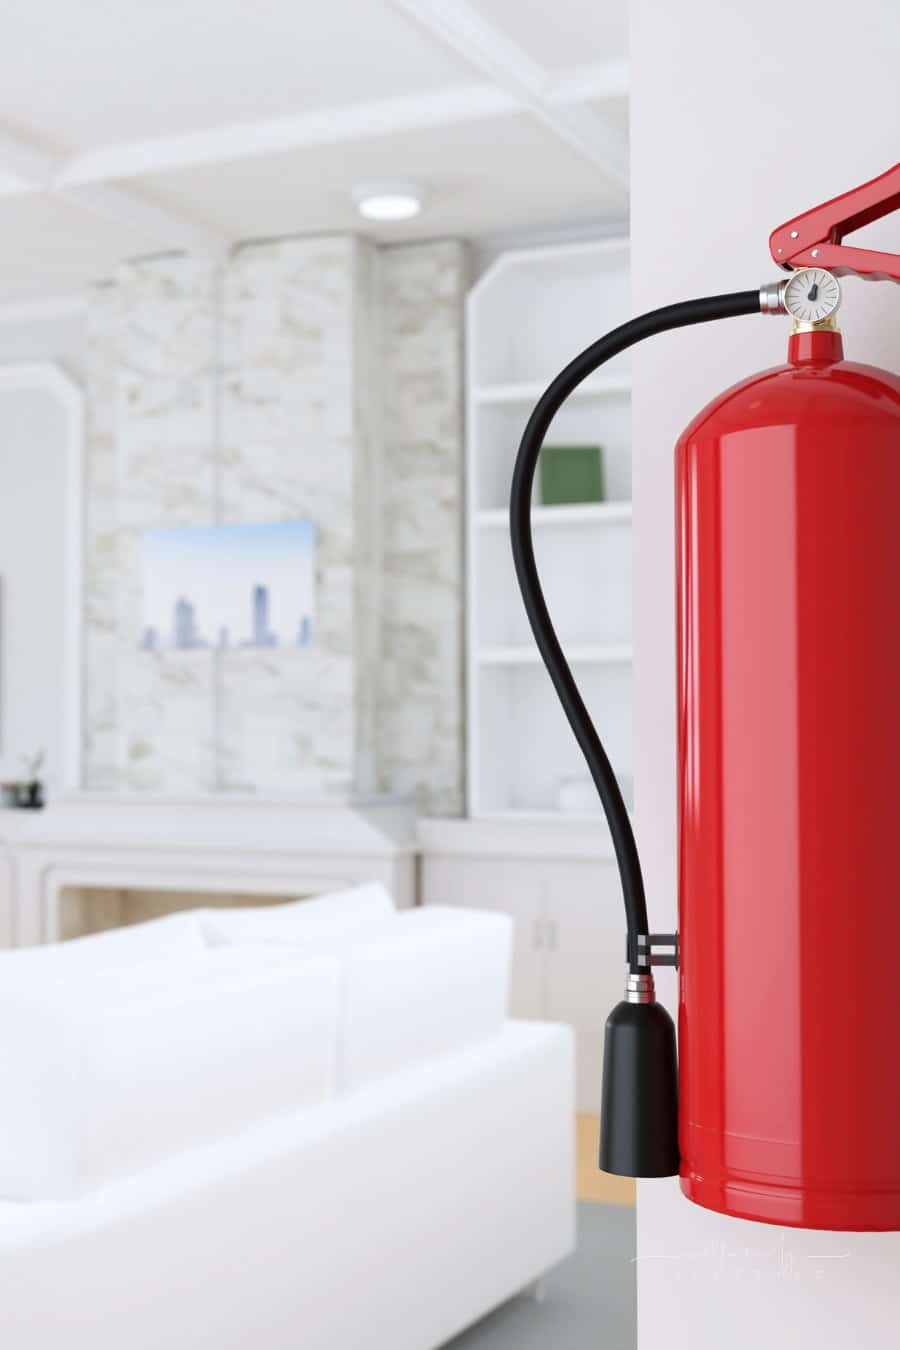 fire extinguisher hanging on wall near living room fireplace